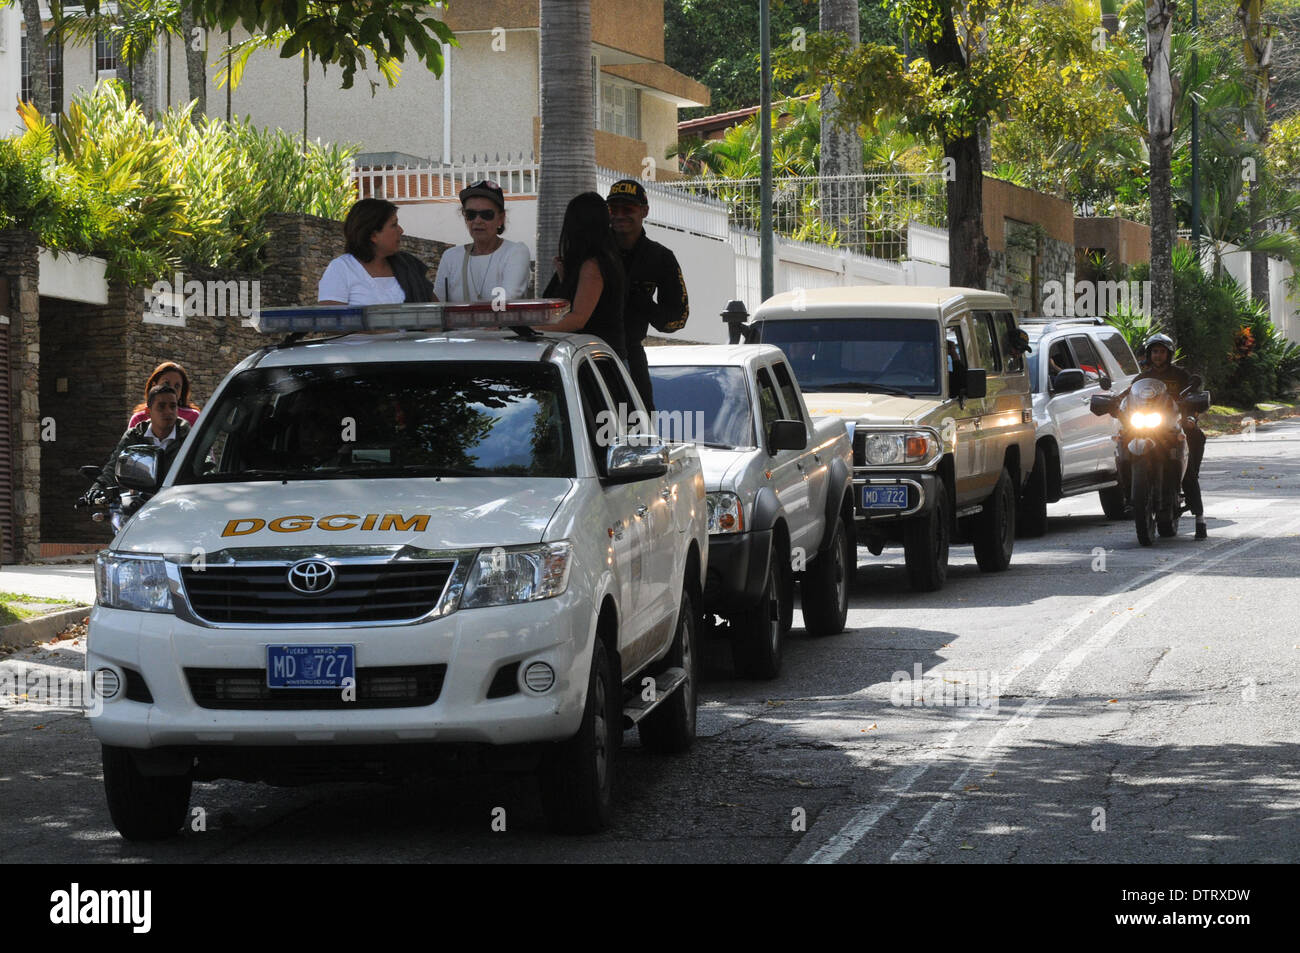 Miranda, Venezuela. 23rd Feb, 2014. Vehicles of the General Direction of Military Counterintelligence stand guard in front of the residence of the retired army general Angel Vivas, accused by Venezuelan President Nicolas Maduro of inciting violence, in Miranda state, Venezuela, on Feb. 23, 2014. © Str/Xinhua/Alamy Live News Stock Photo